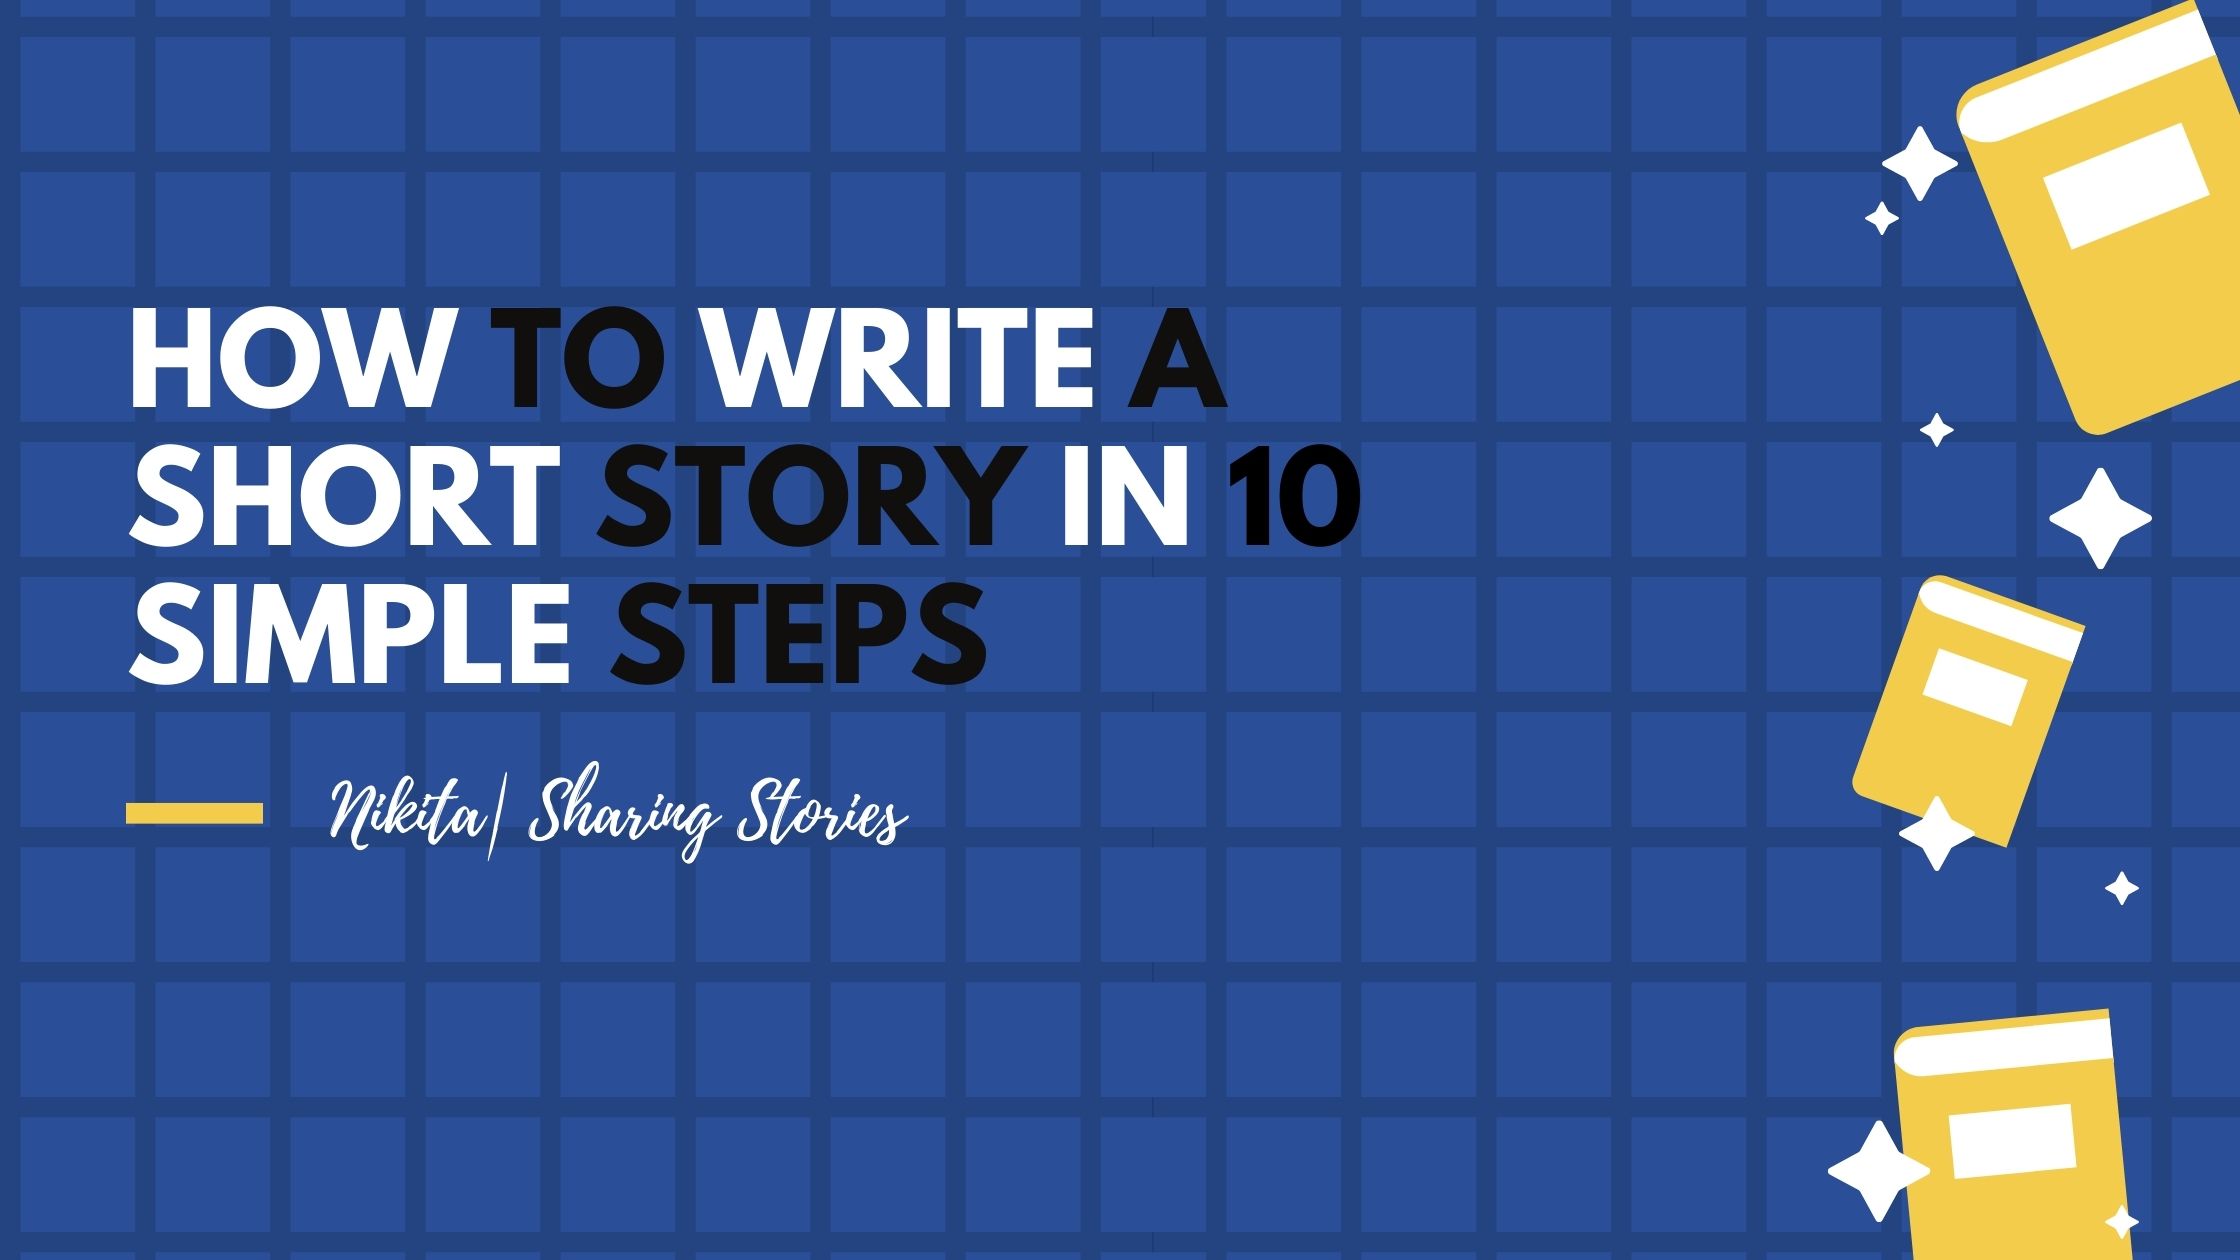 How To Write A Short Story In 10 Simple Steps